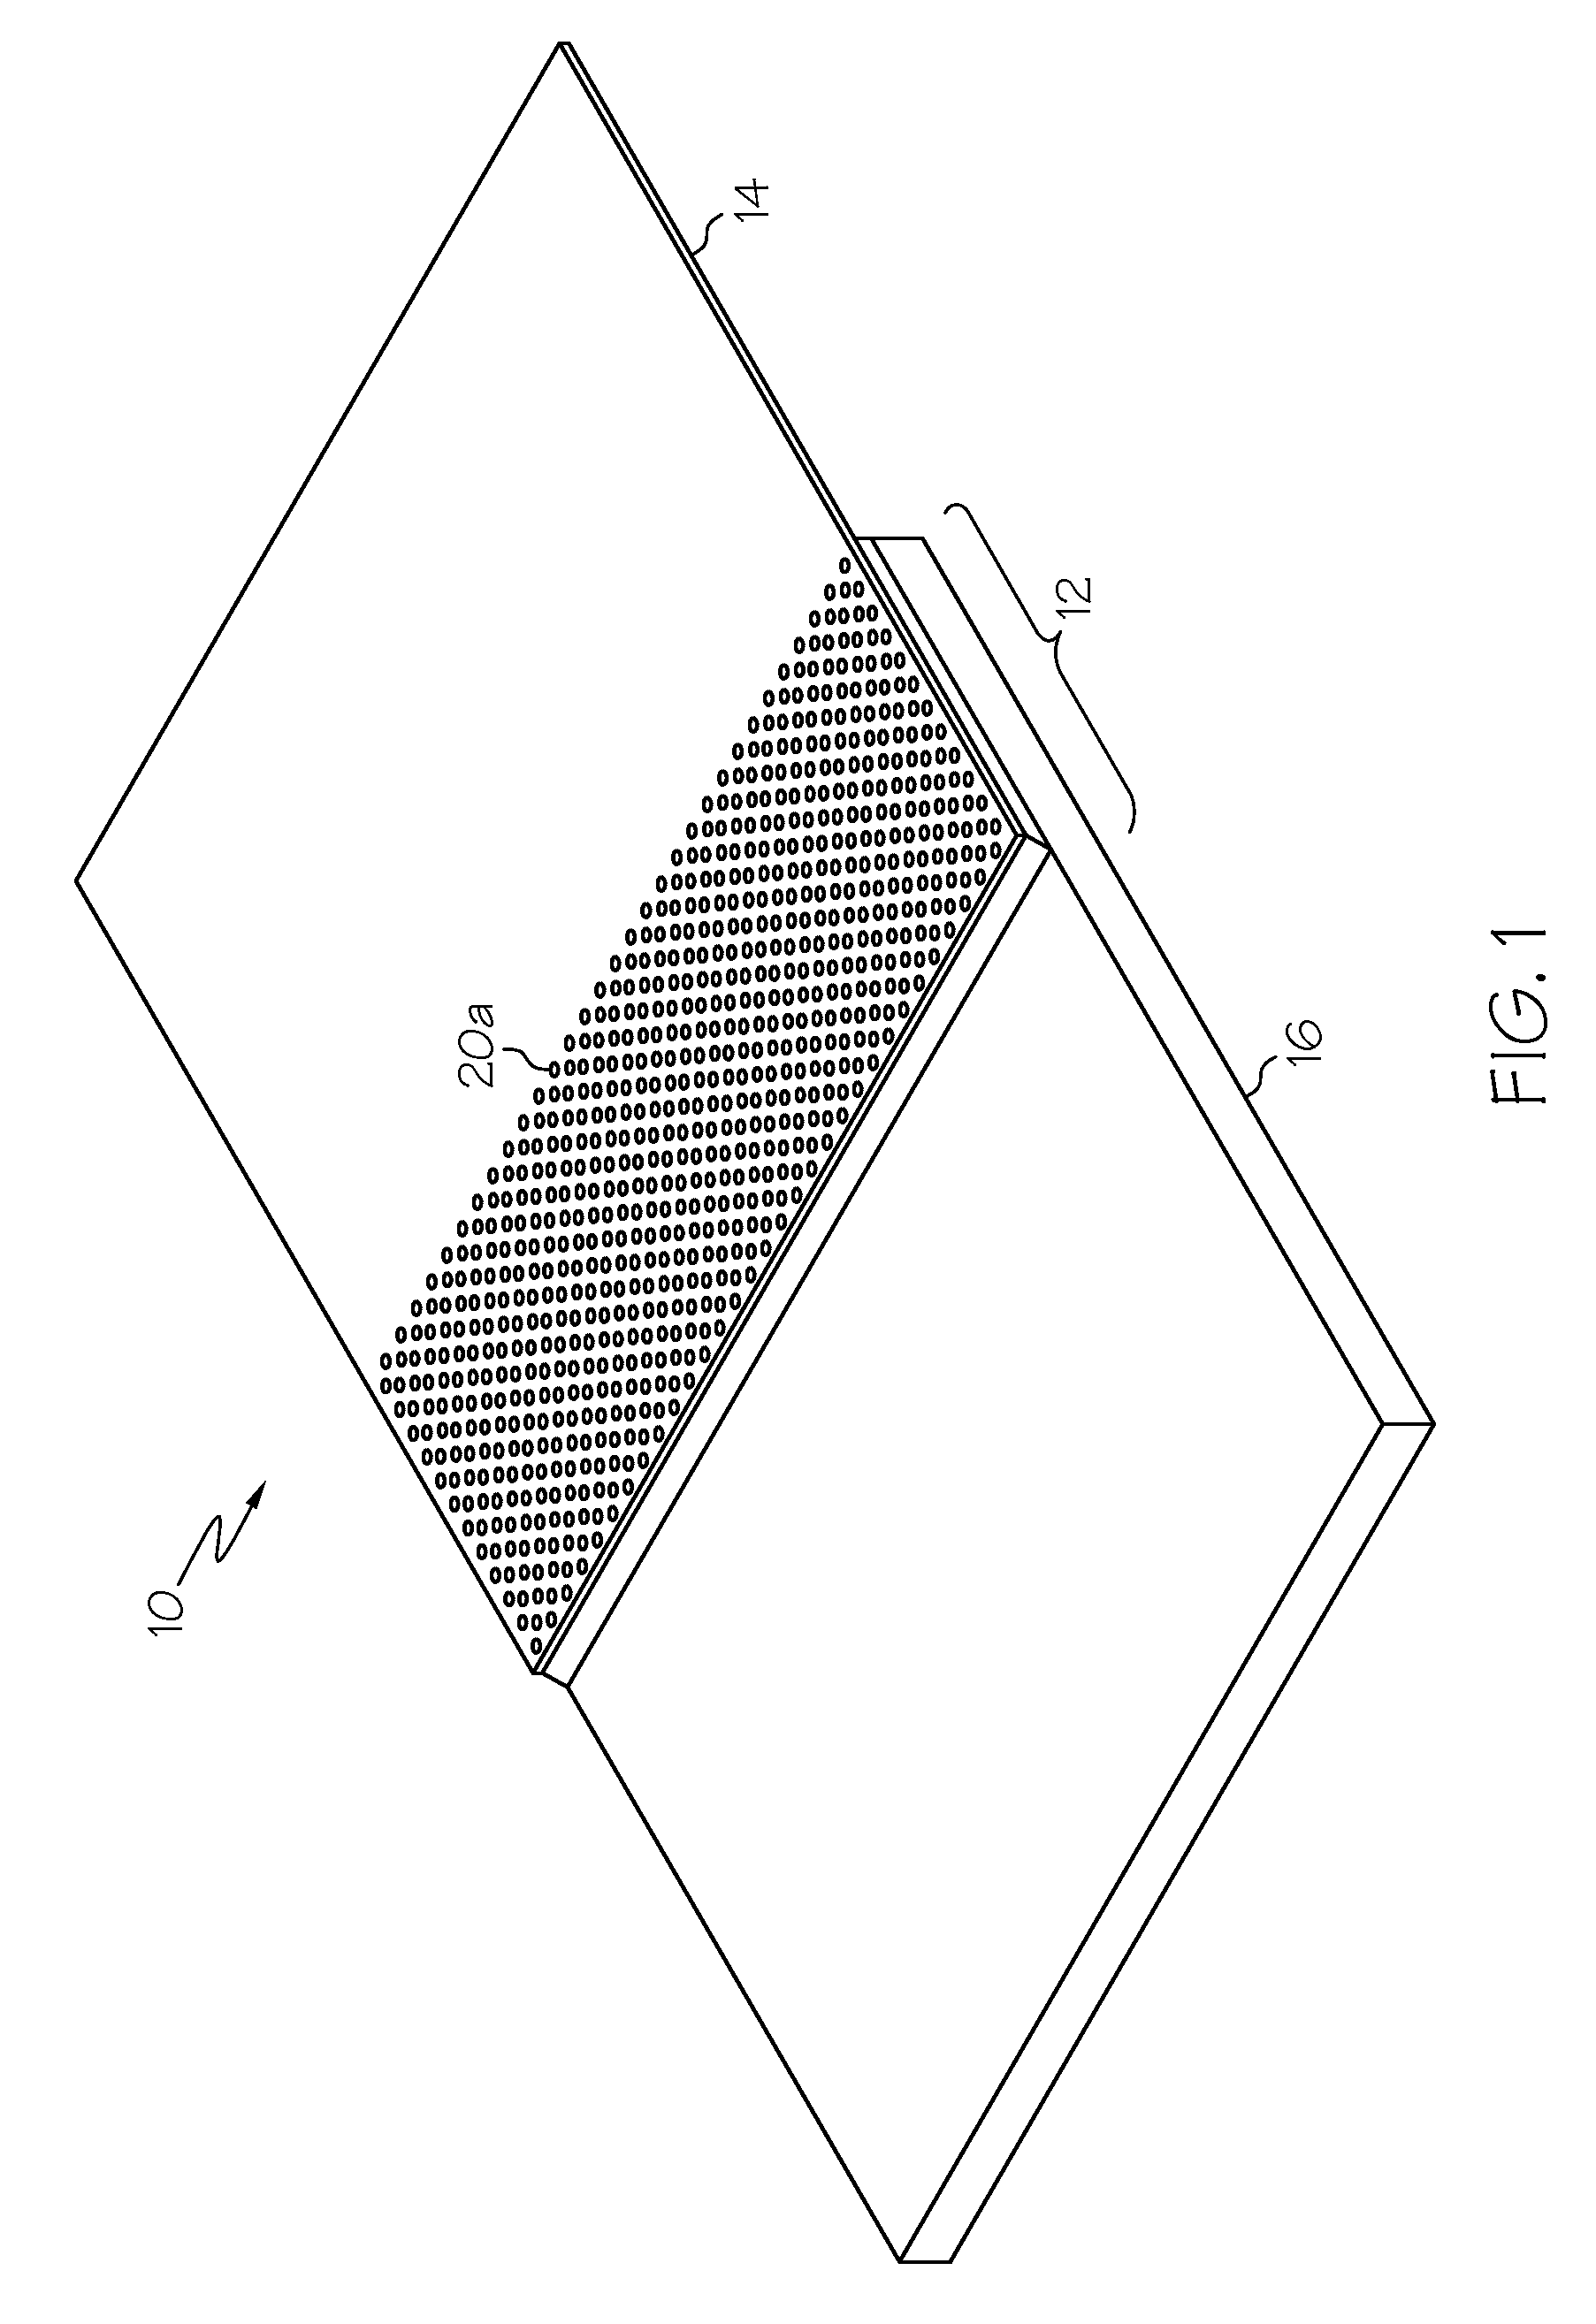 Bonded assemblies and methods for improving bond strength of a joint